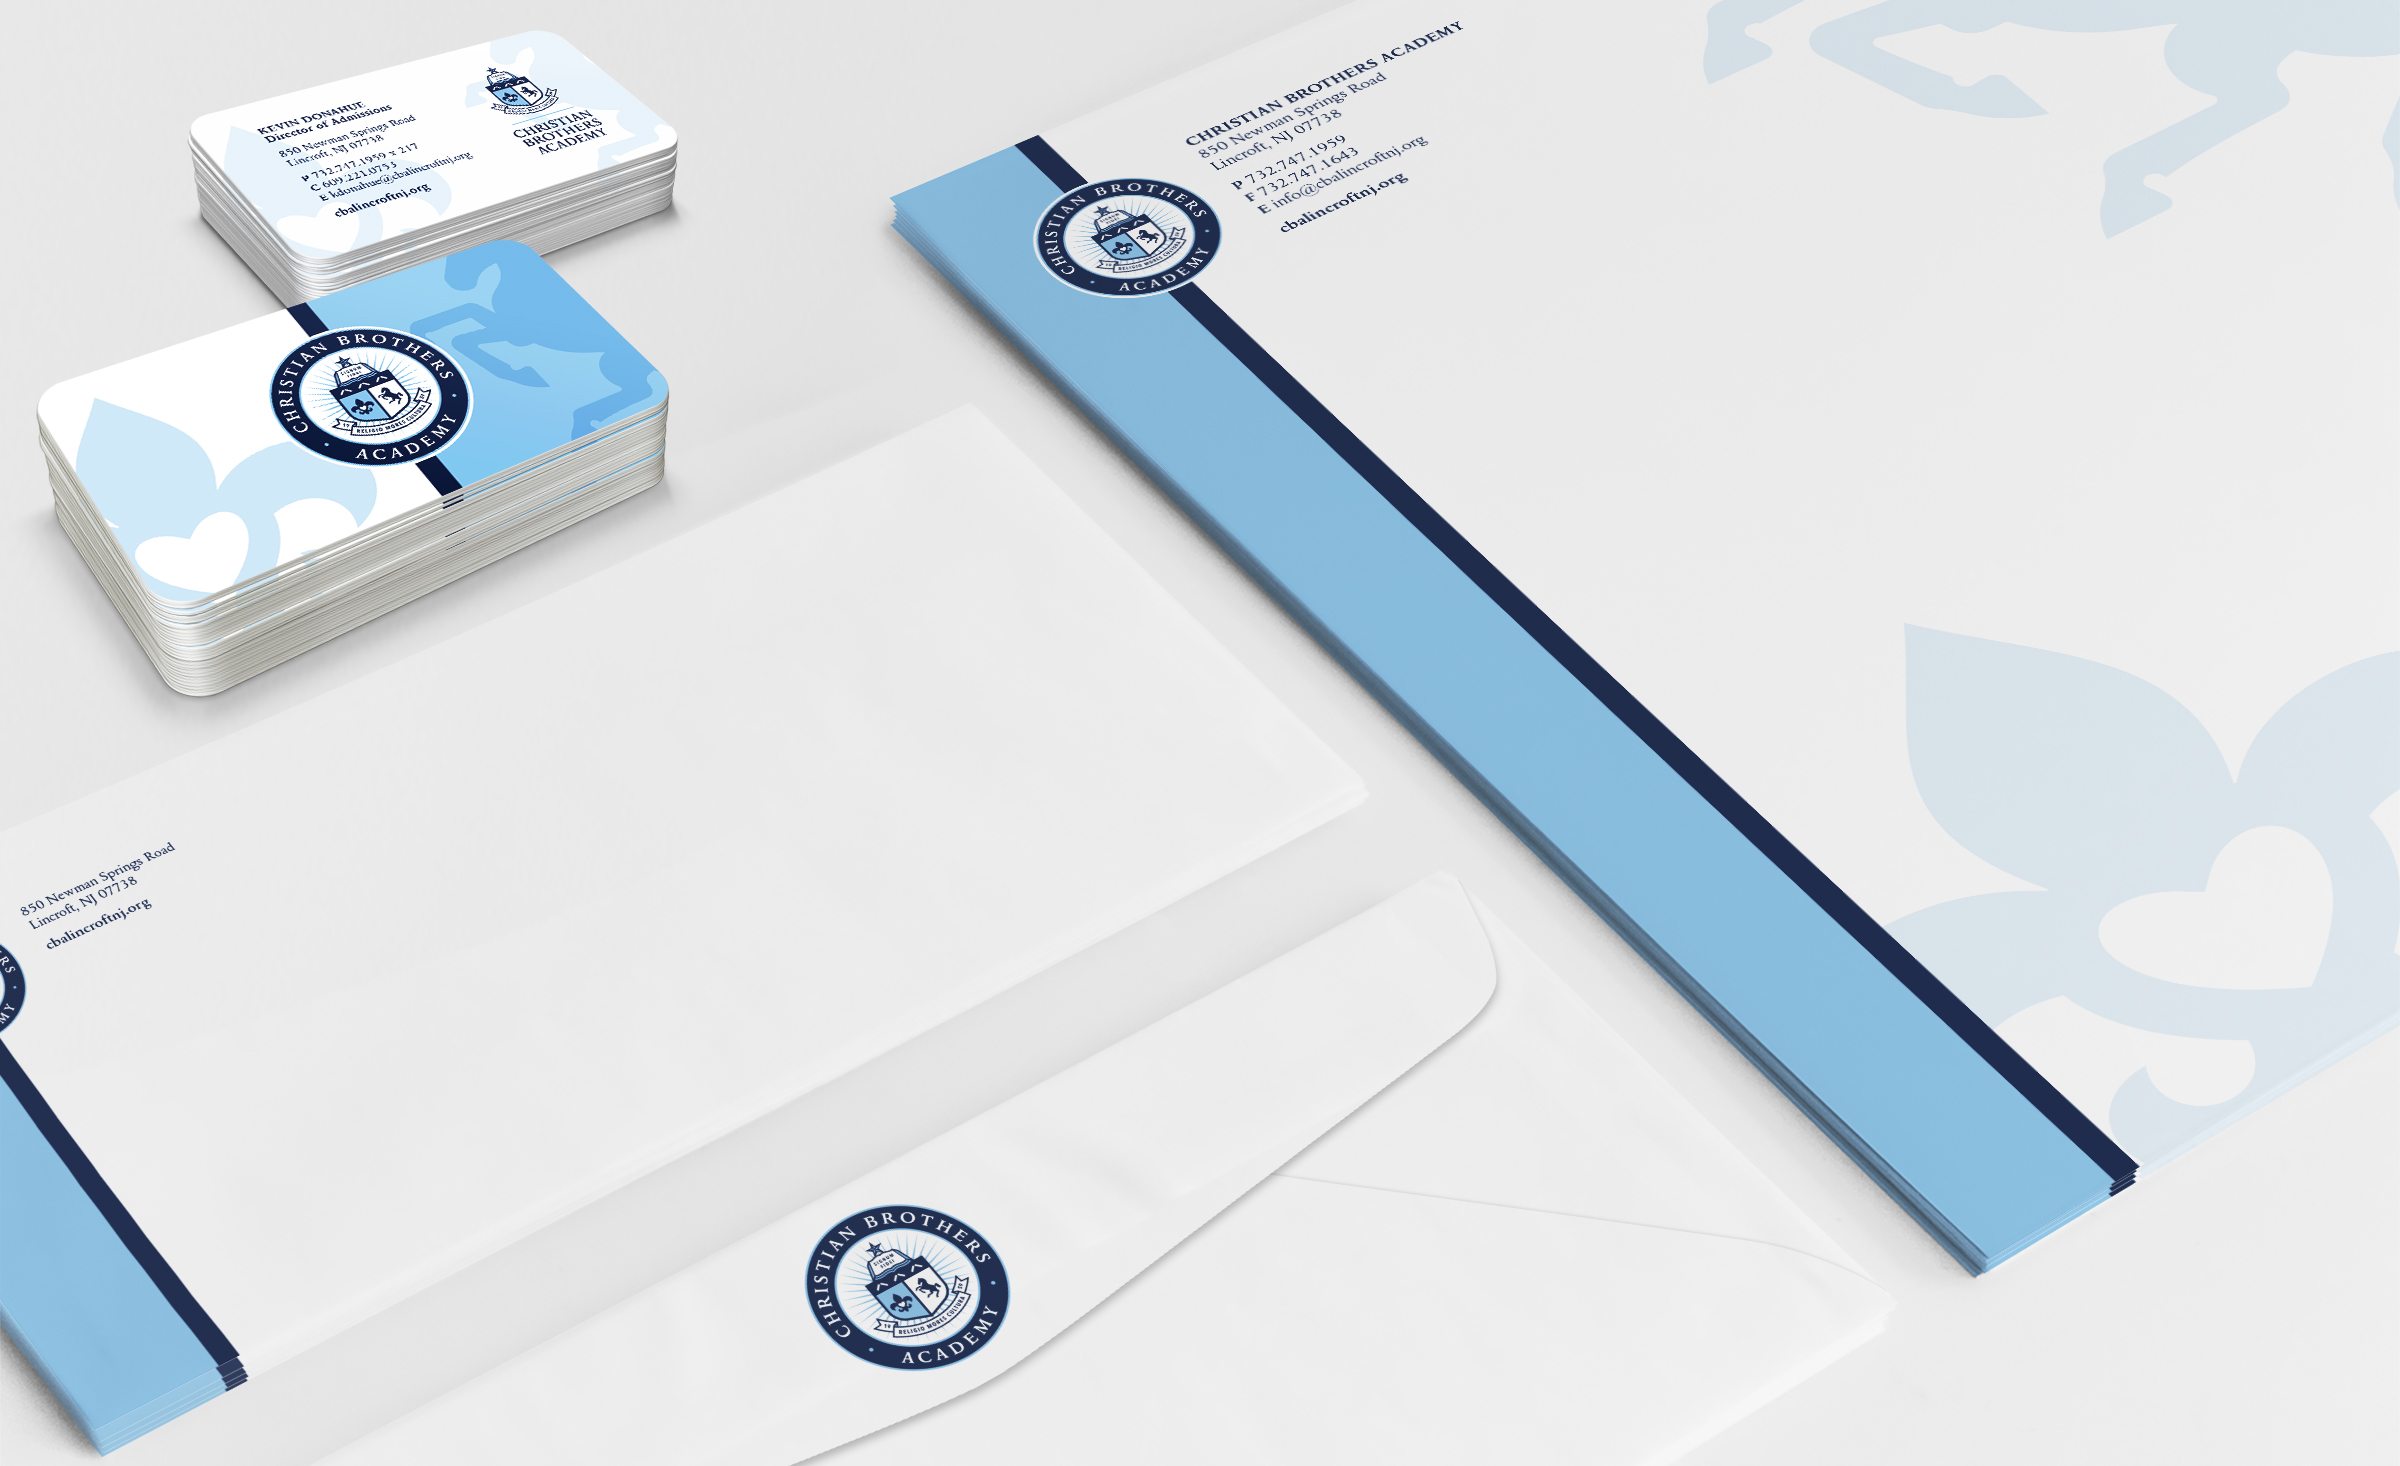 Stationery design for Christian Brothers Academy.